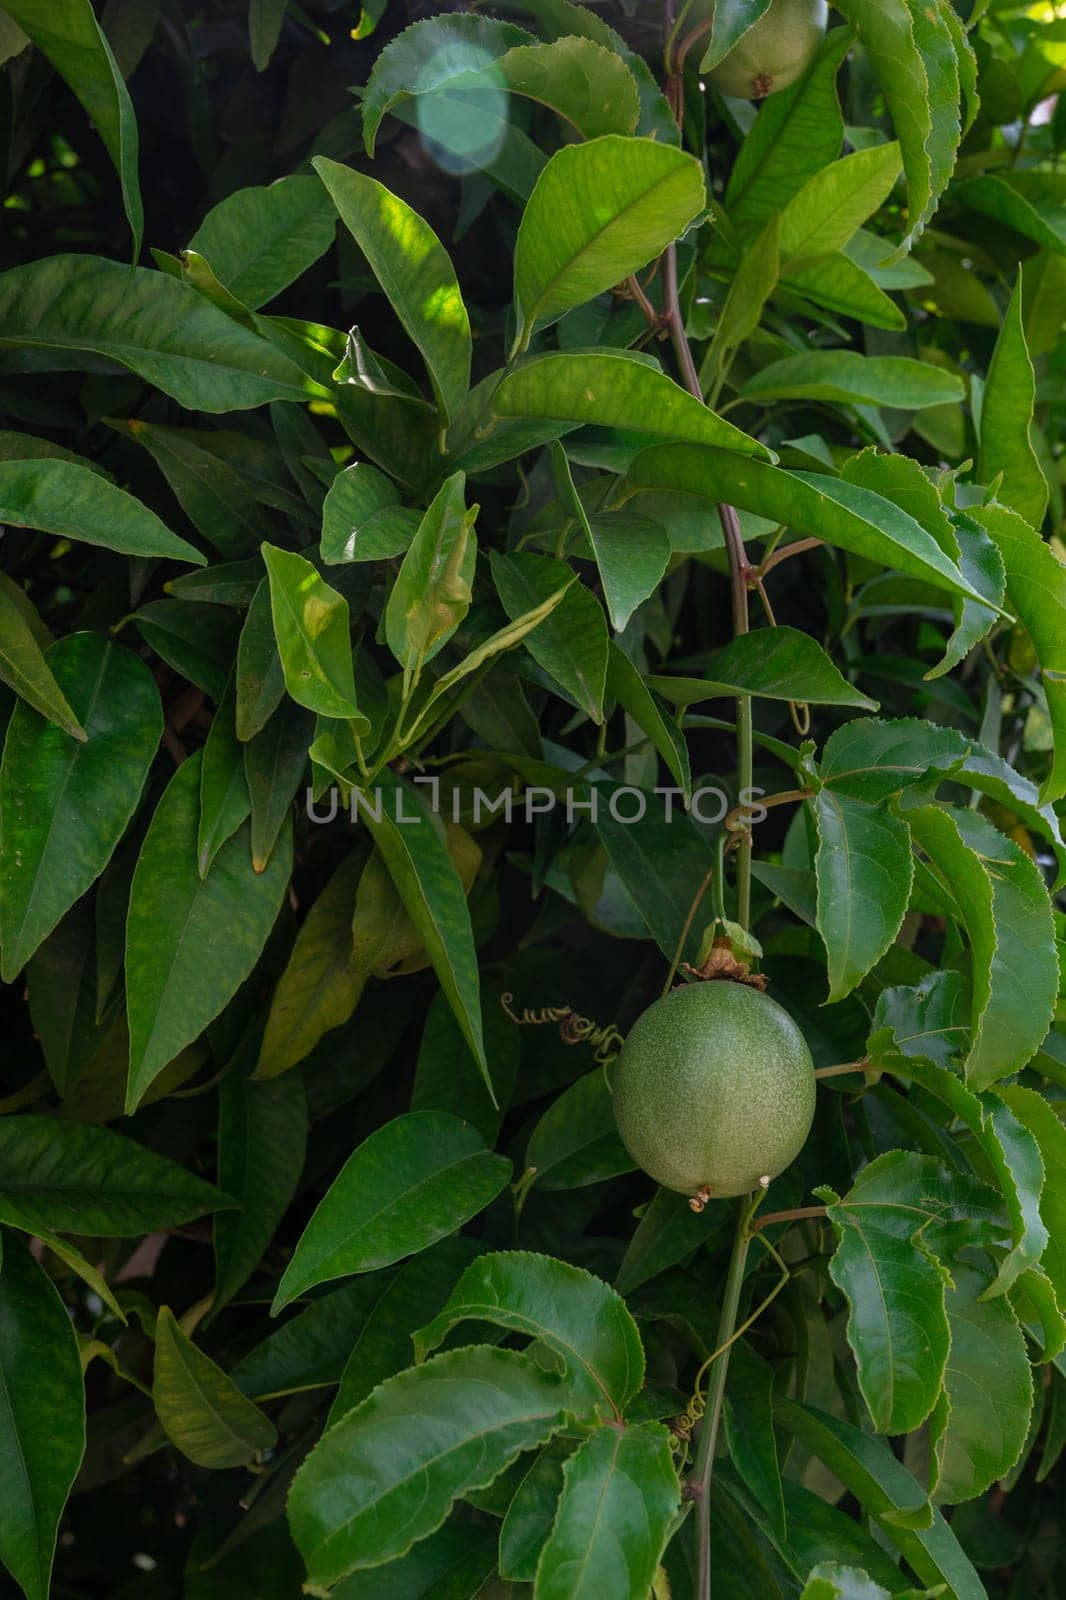 Passion fruit growing by rusak